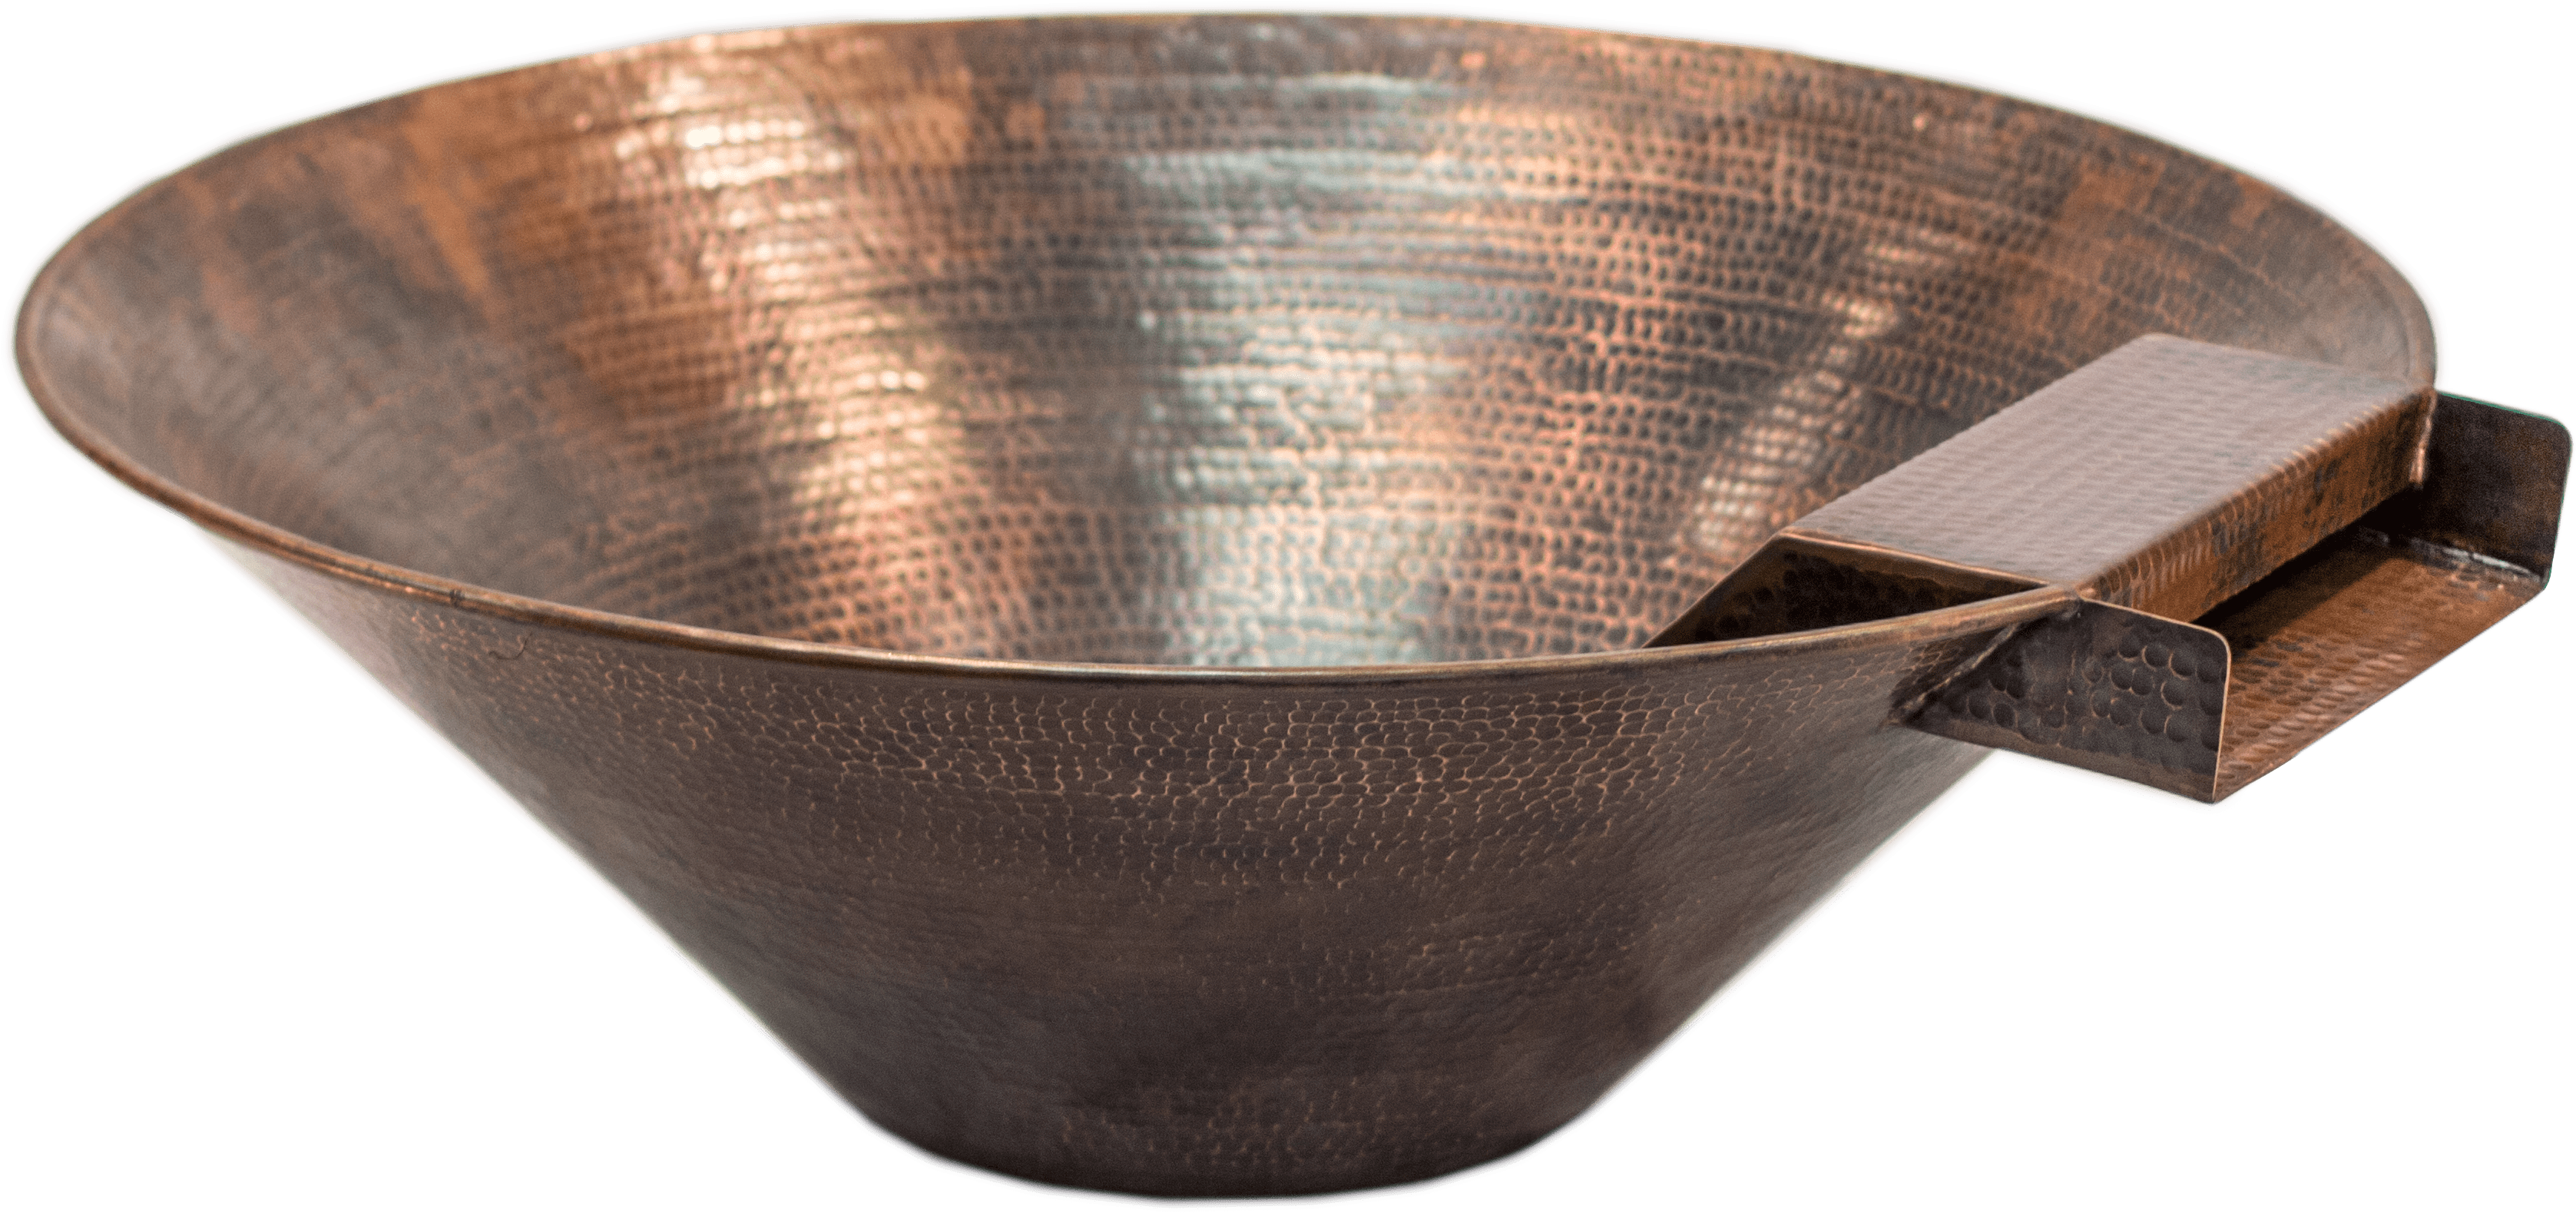 A Copper Bowl With A Handle